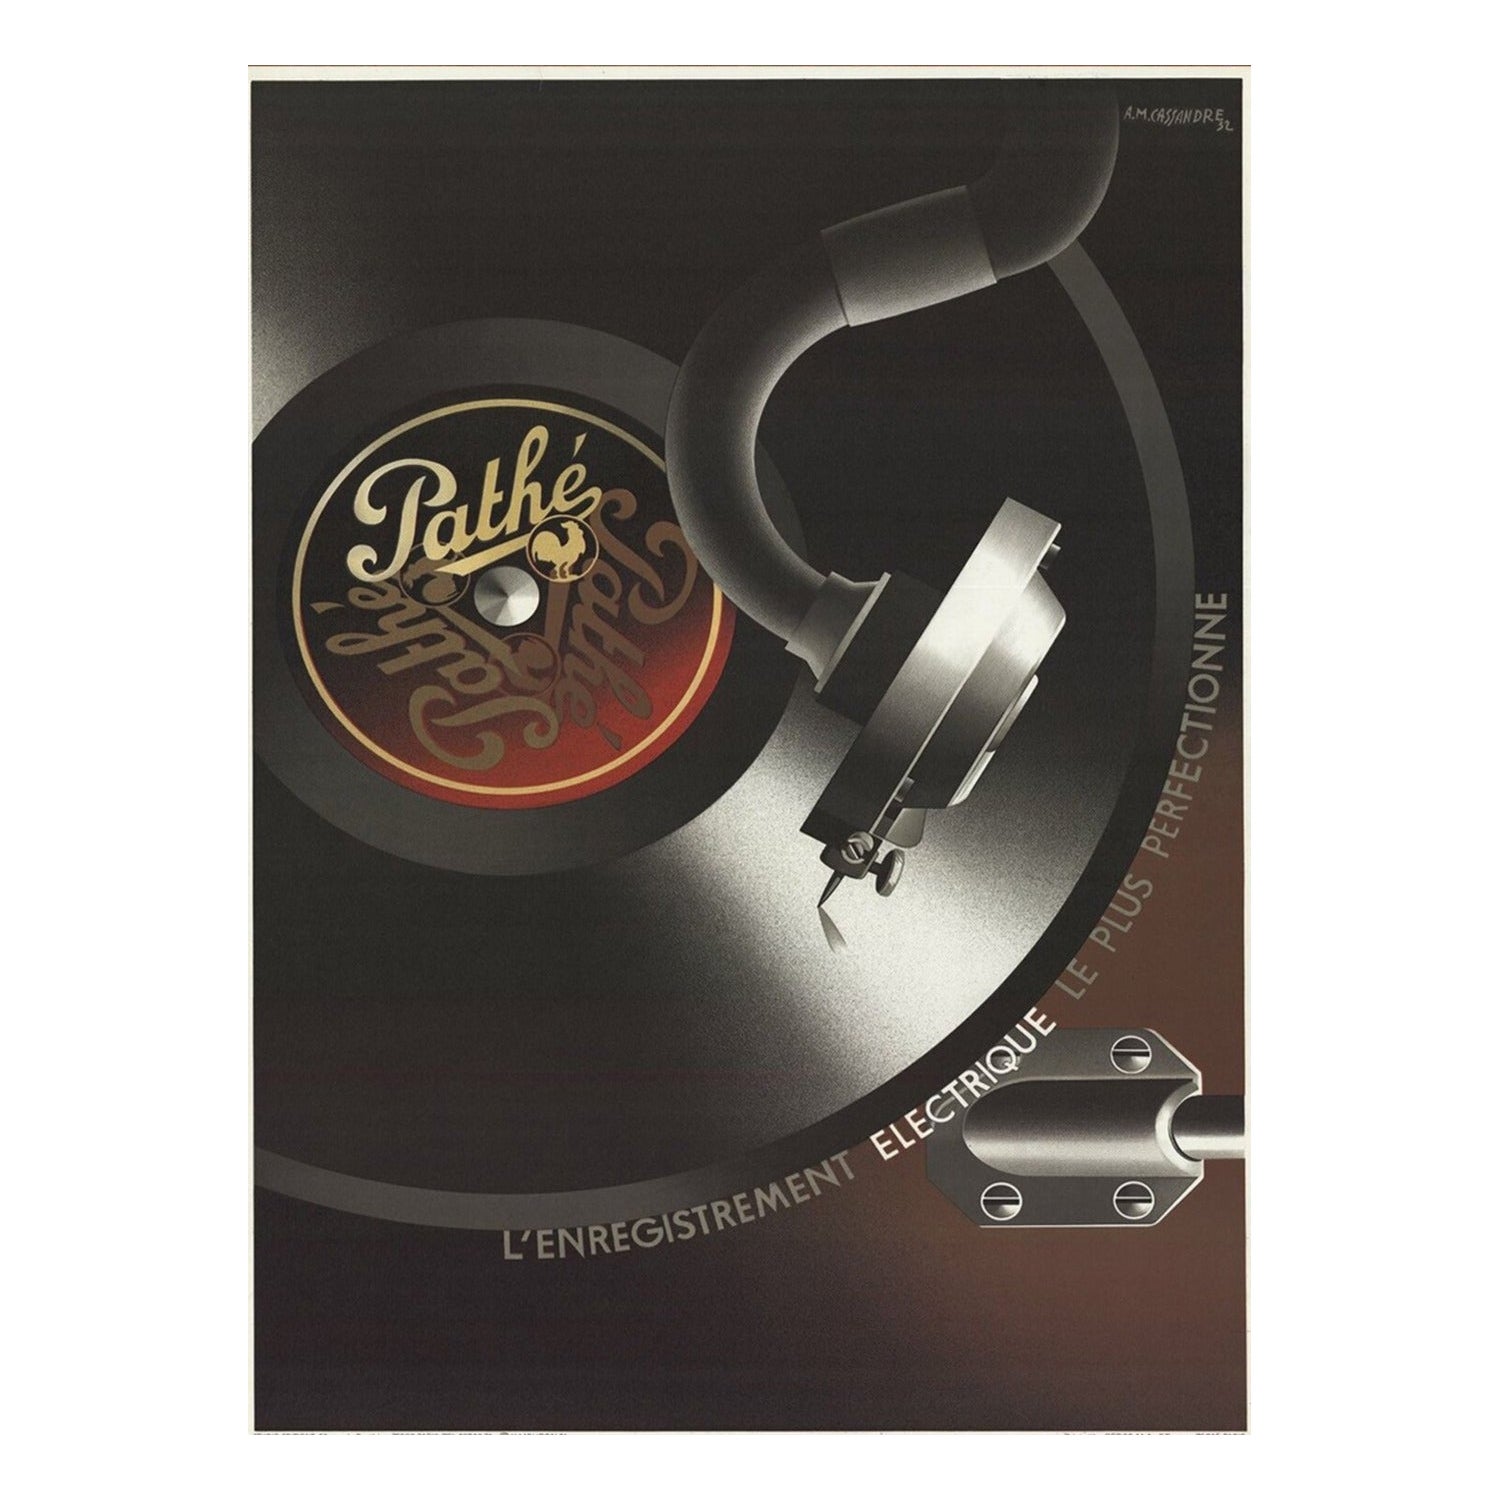 1981 Pathe Record Player Original Vintage Poster For Sale